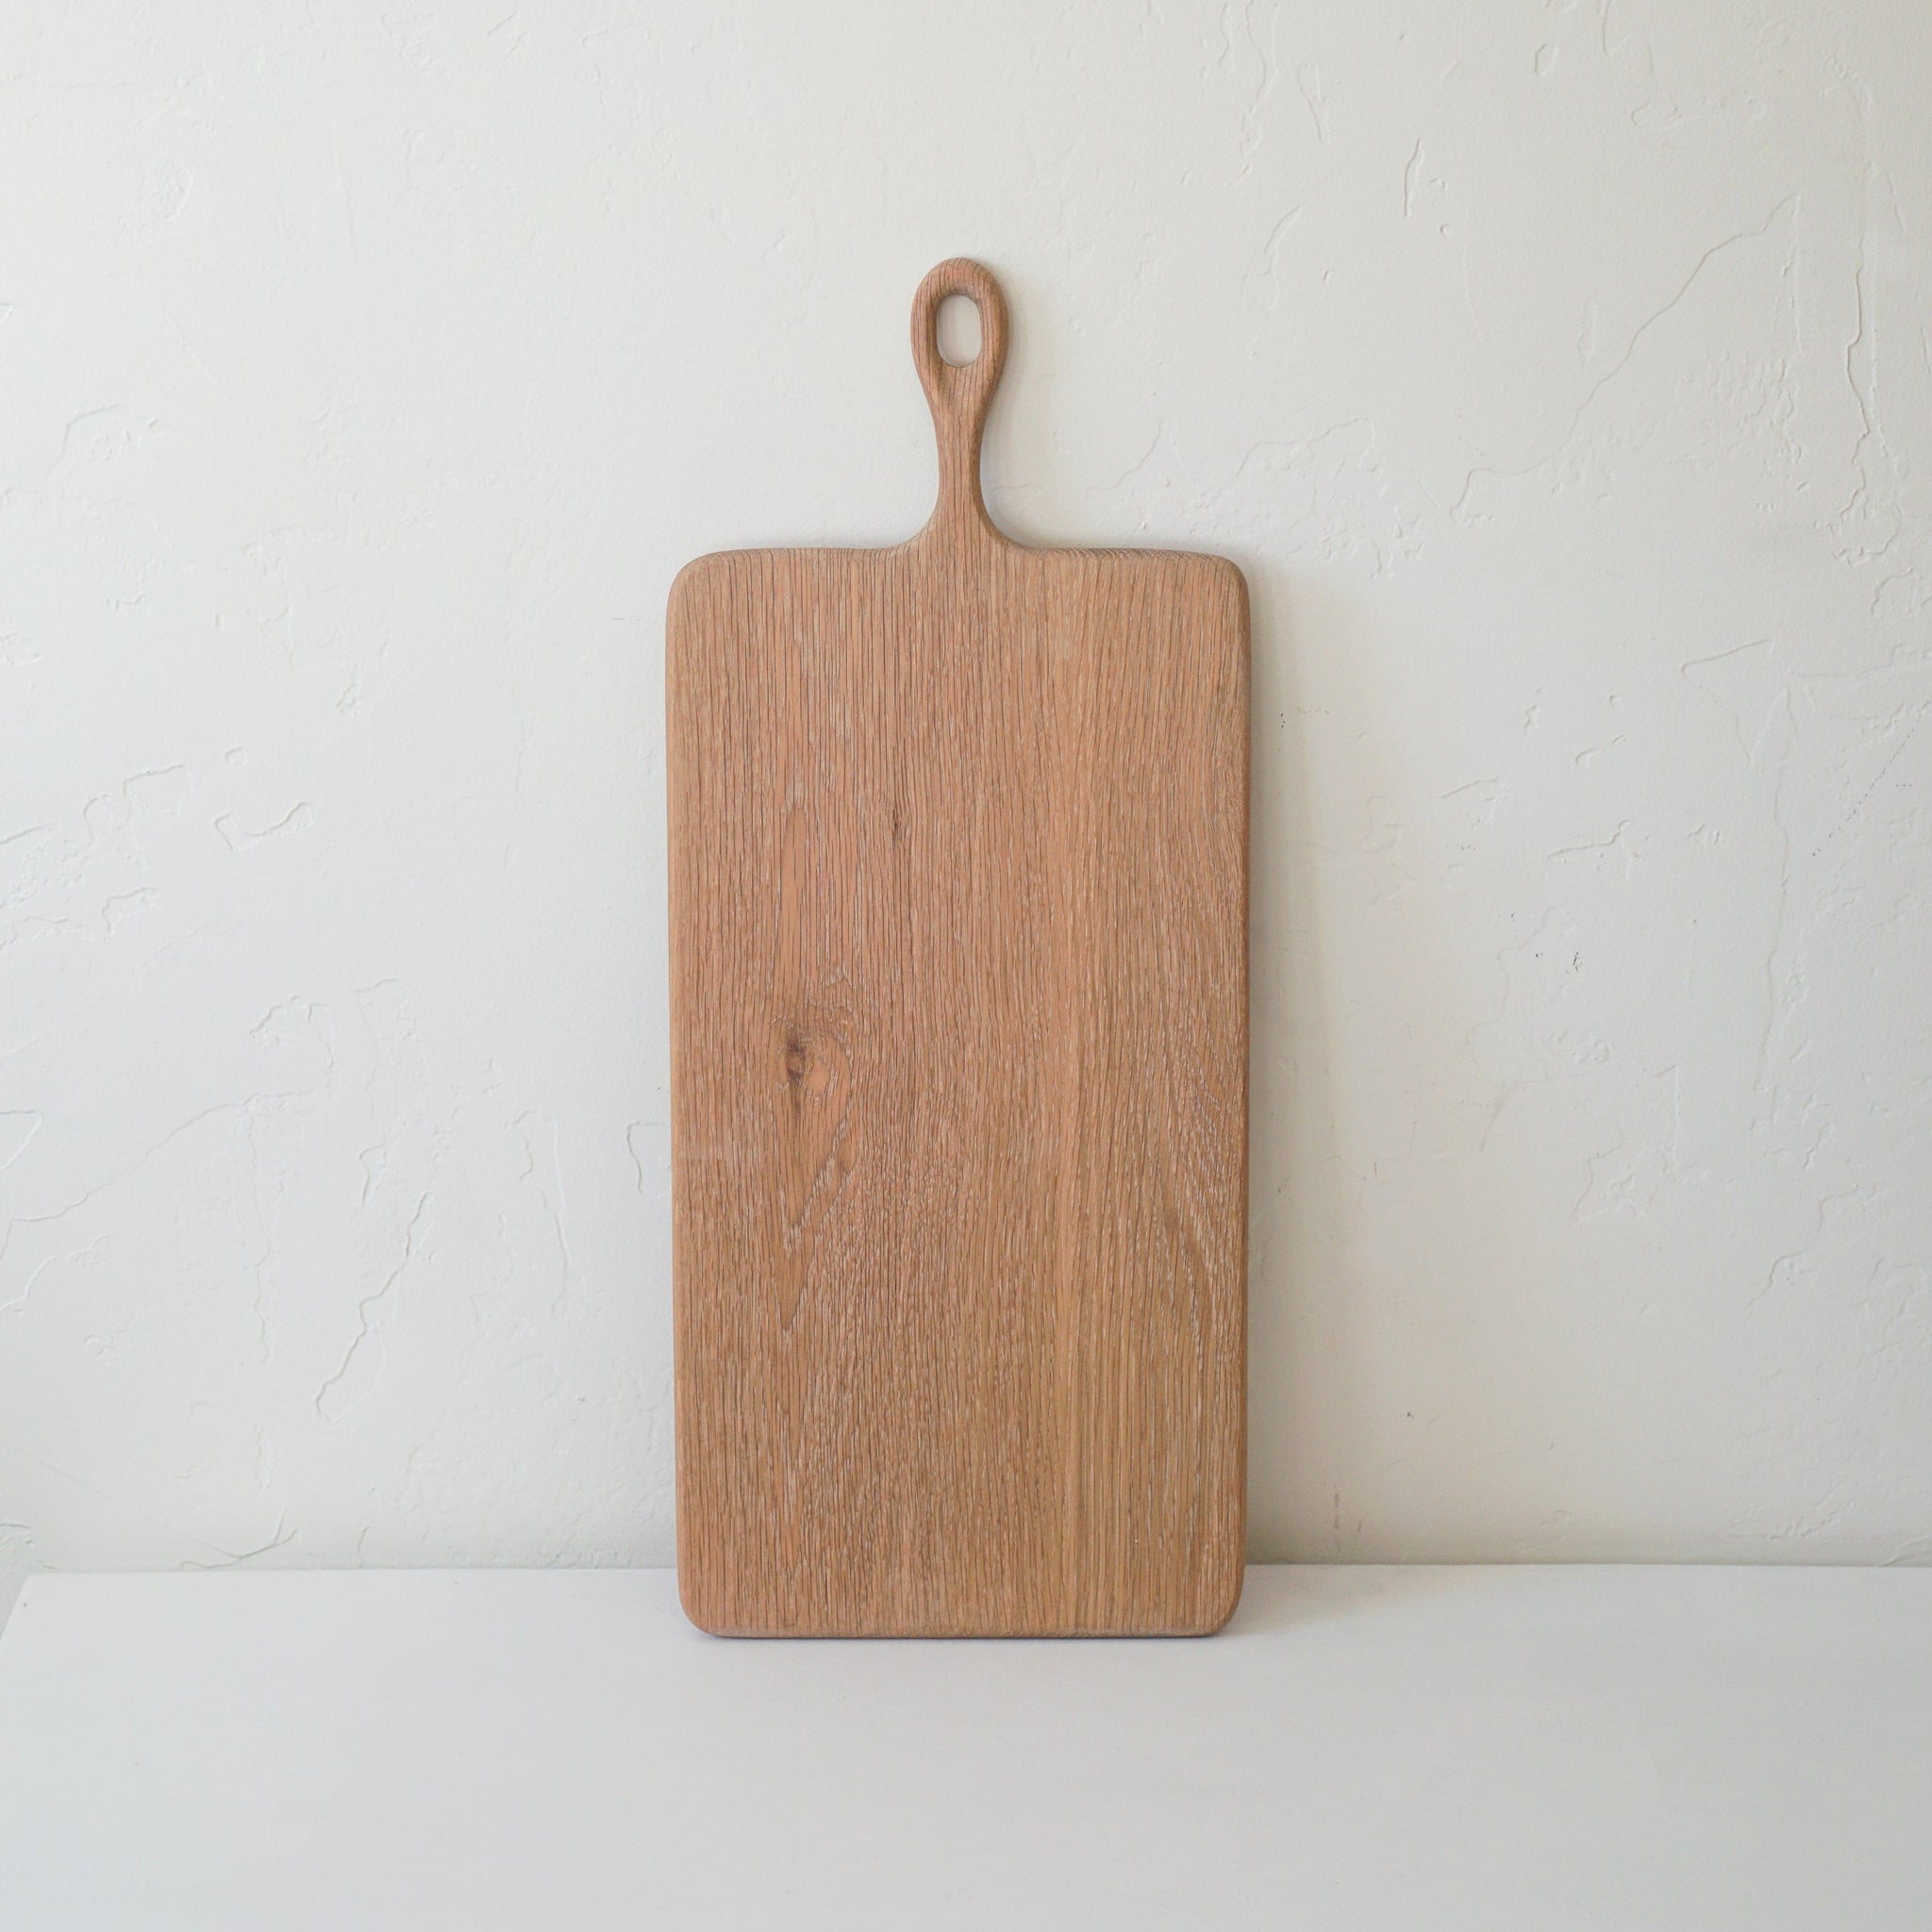 The Wooden Palate Kitchen & Dining Charcuterie Board in White Oak